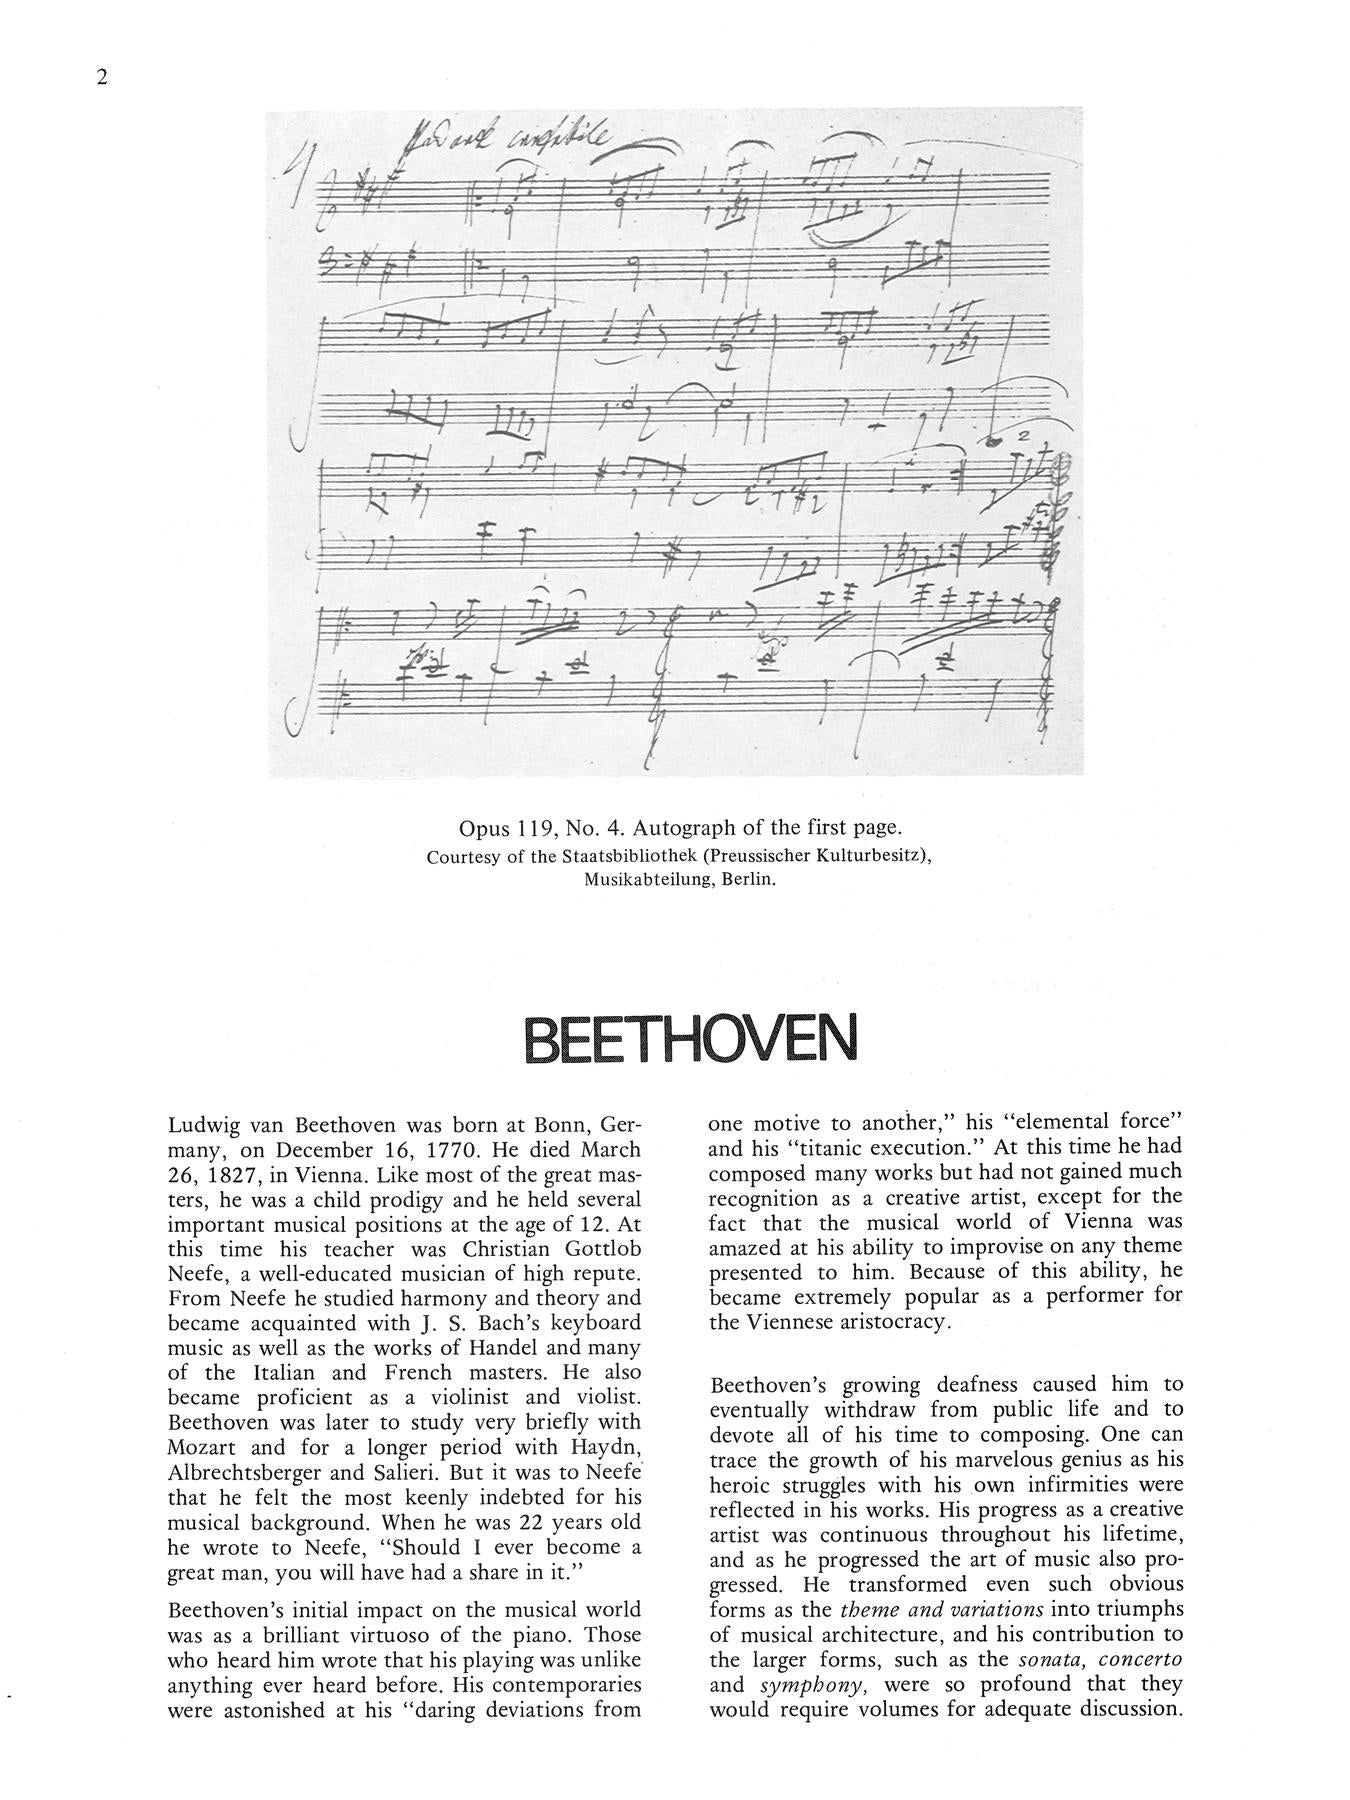 Beethoven: Eleven Bagatelles, Opus 119 for the Piano